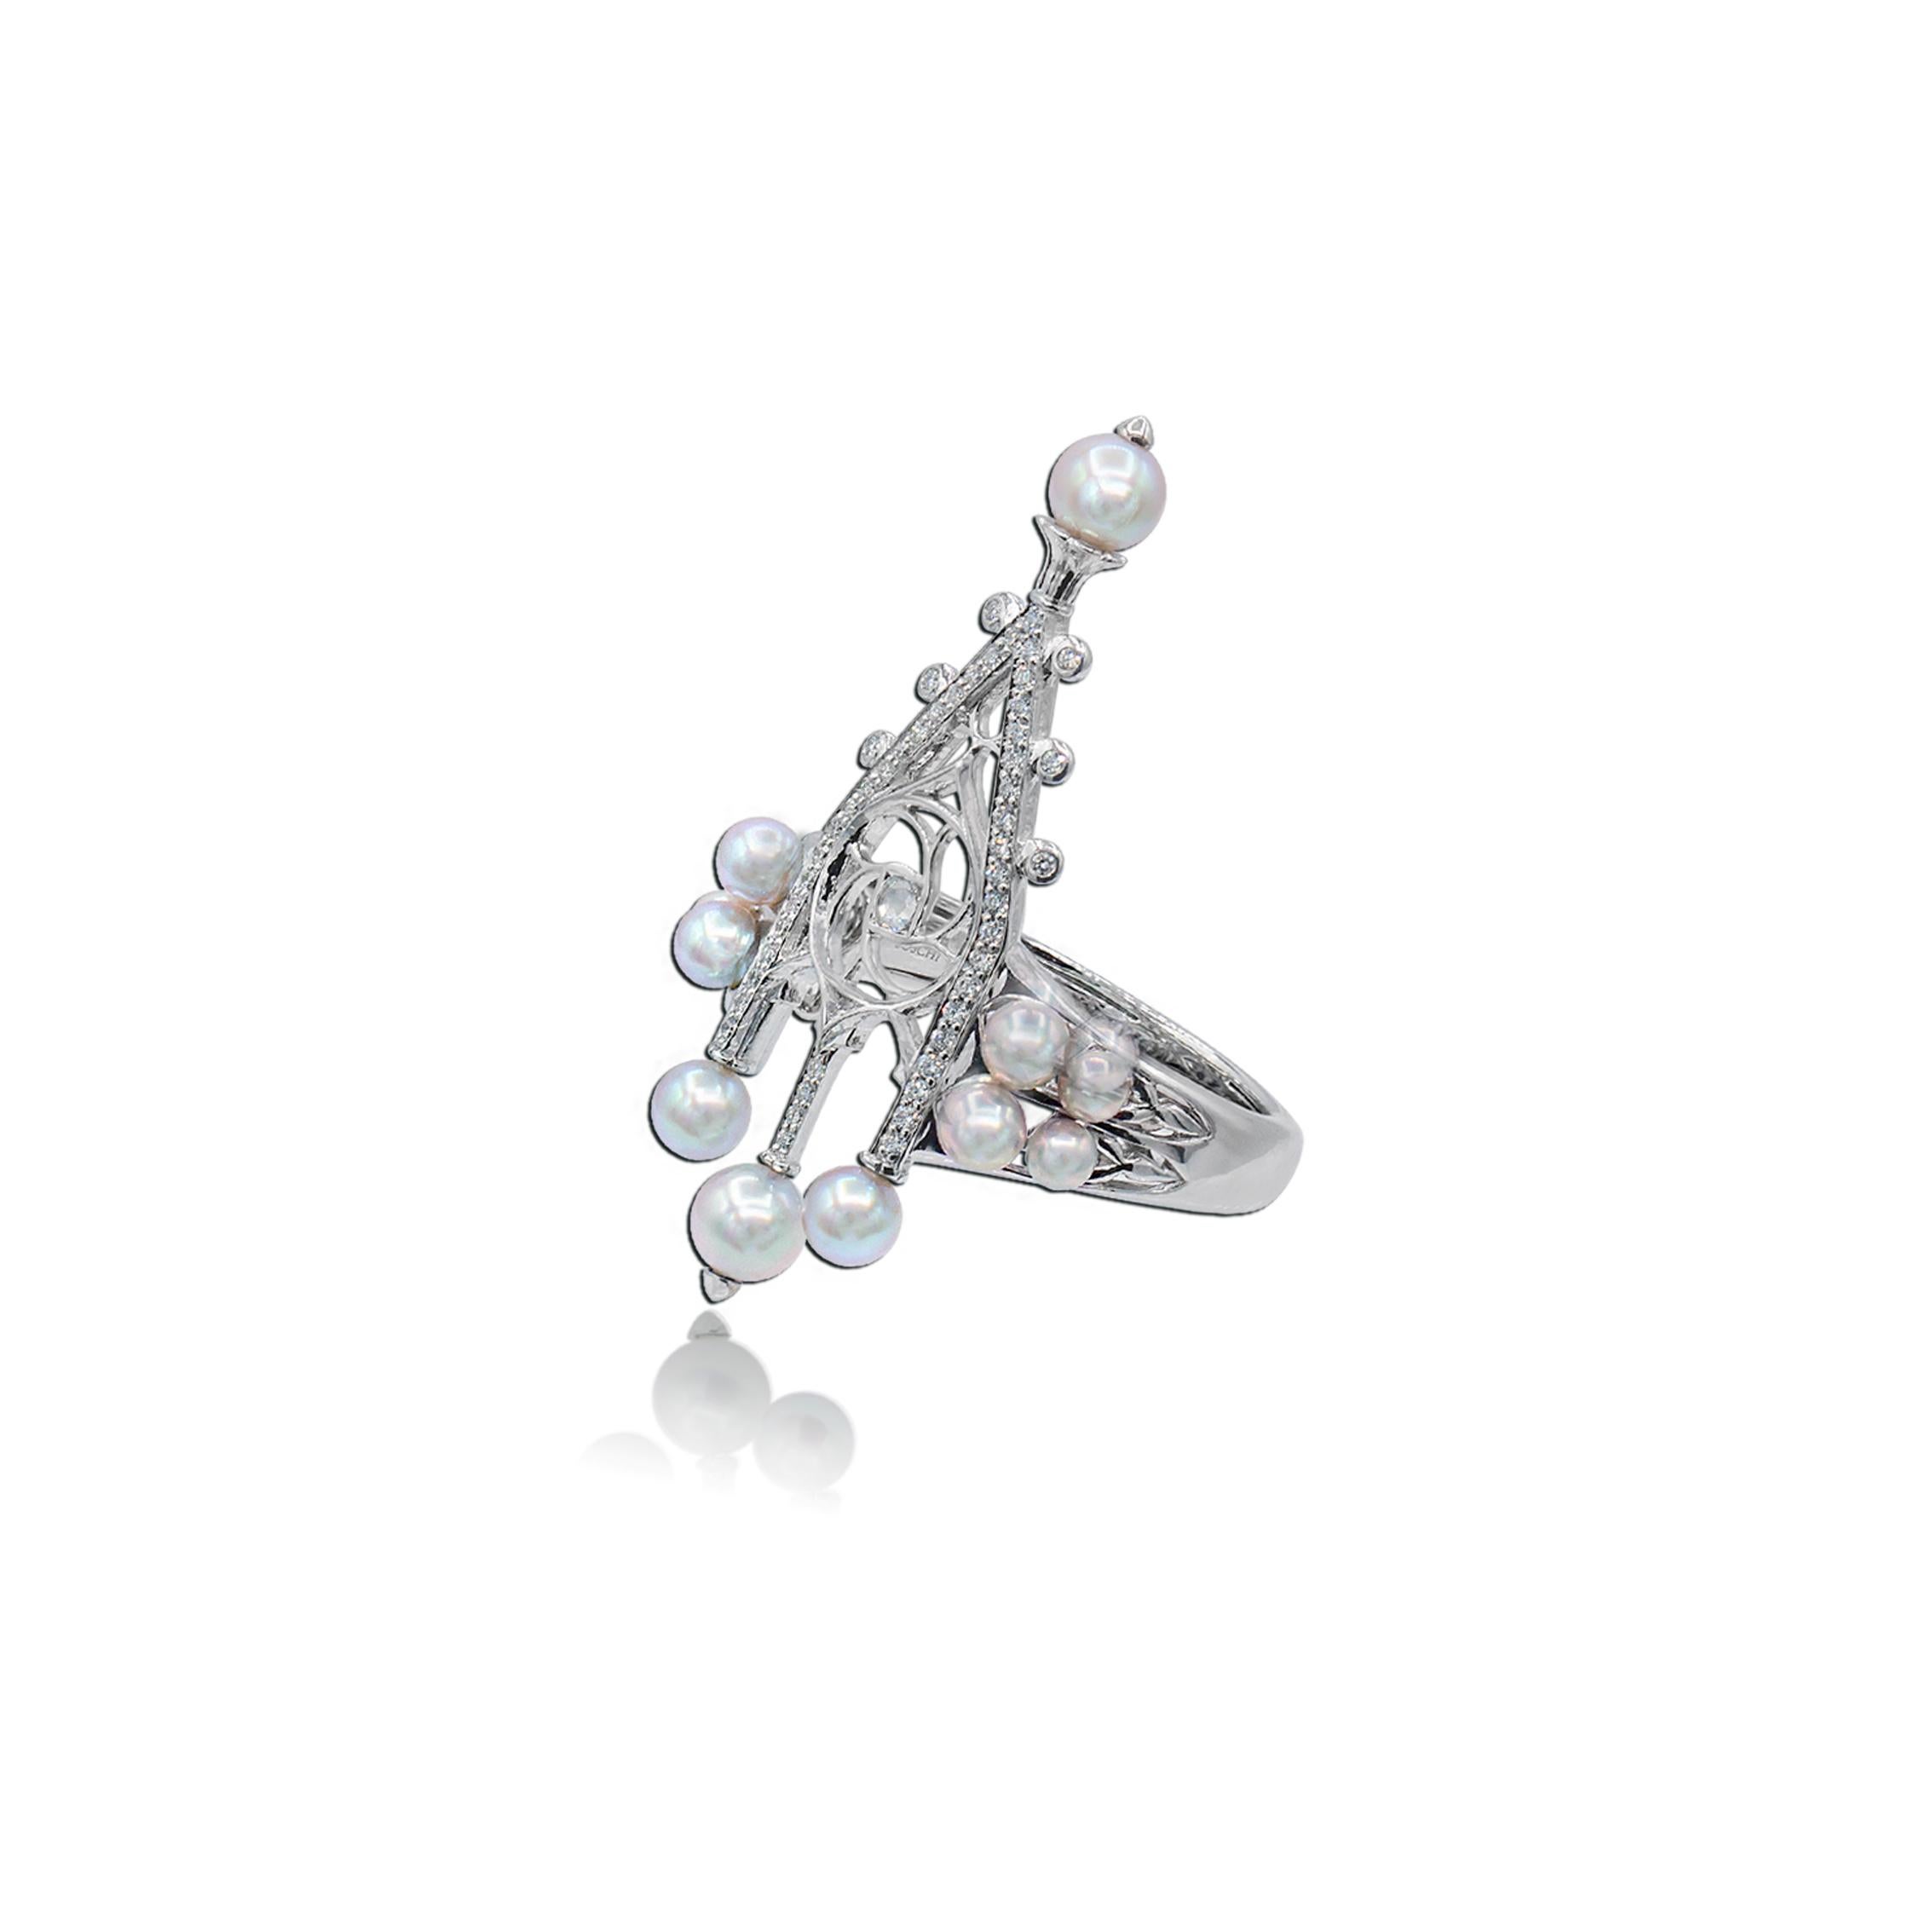 White Diamonds (round and rose cut) 0.14 cts, Baby Silver/Blue Akoya Pearls 12 pcs (from 2.5 to 4.5mm)                                                              

The Glass Pinnacle Ring takes its inspiration from the Gothic architecture of the